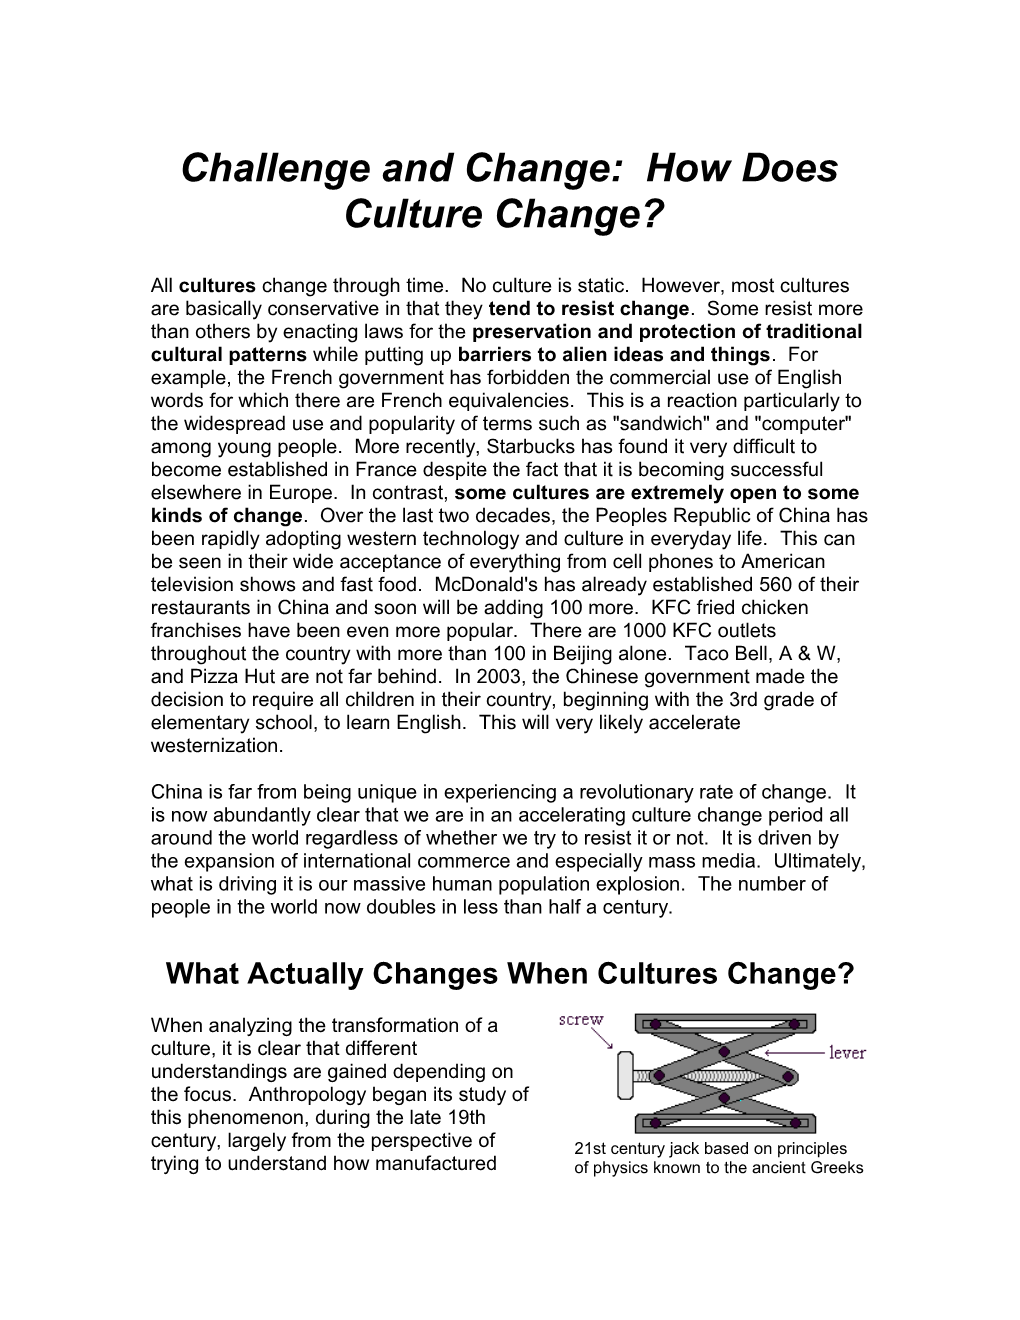 Culture Change: an Overview